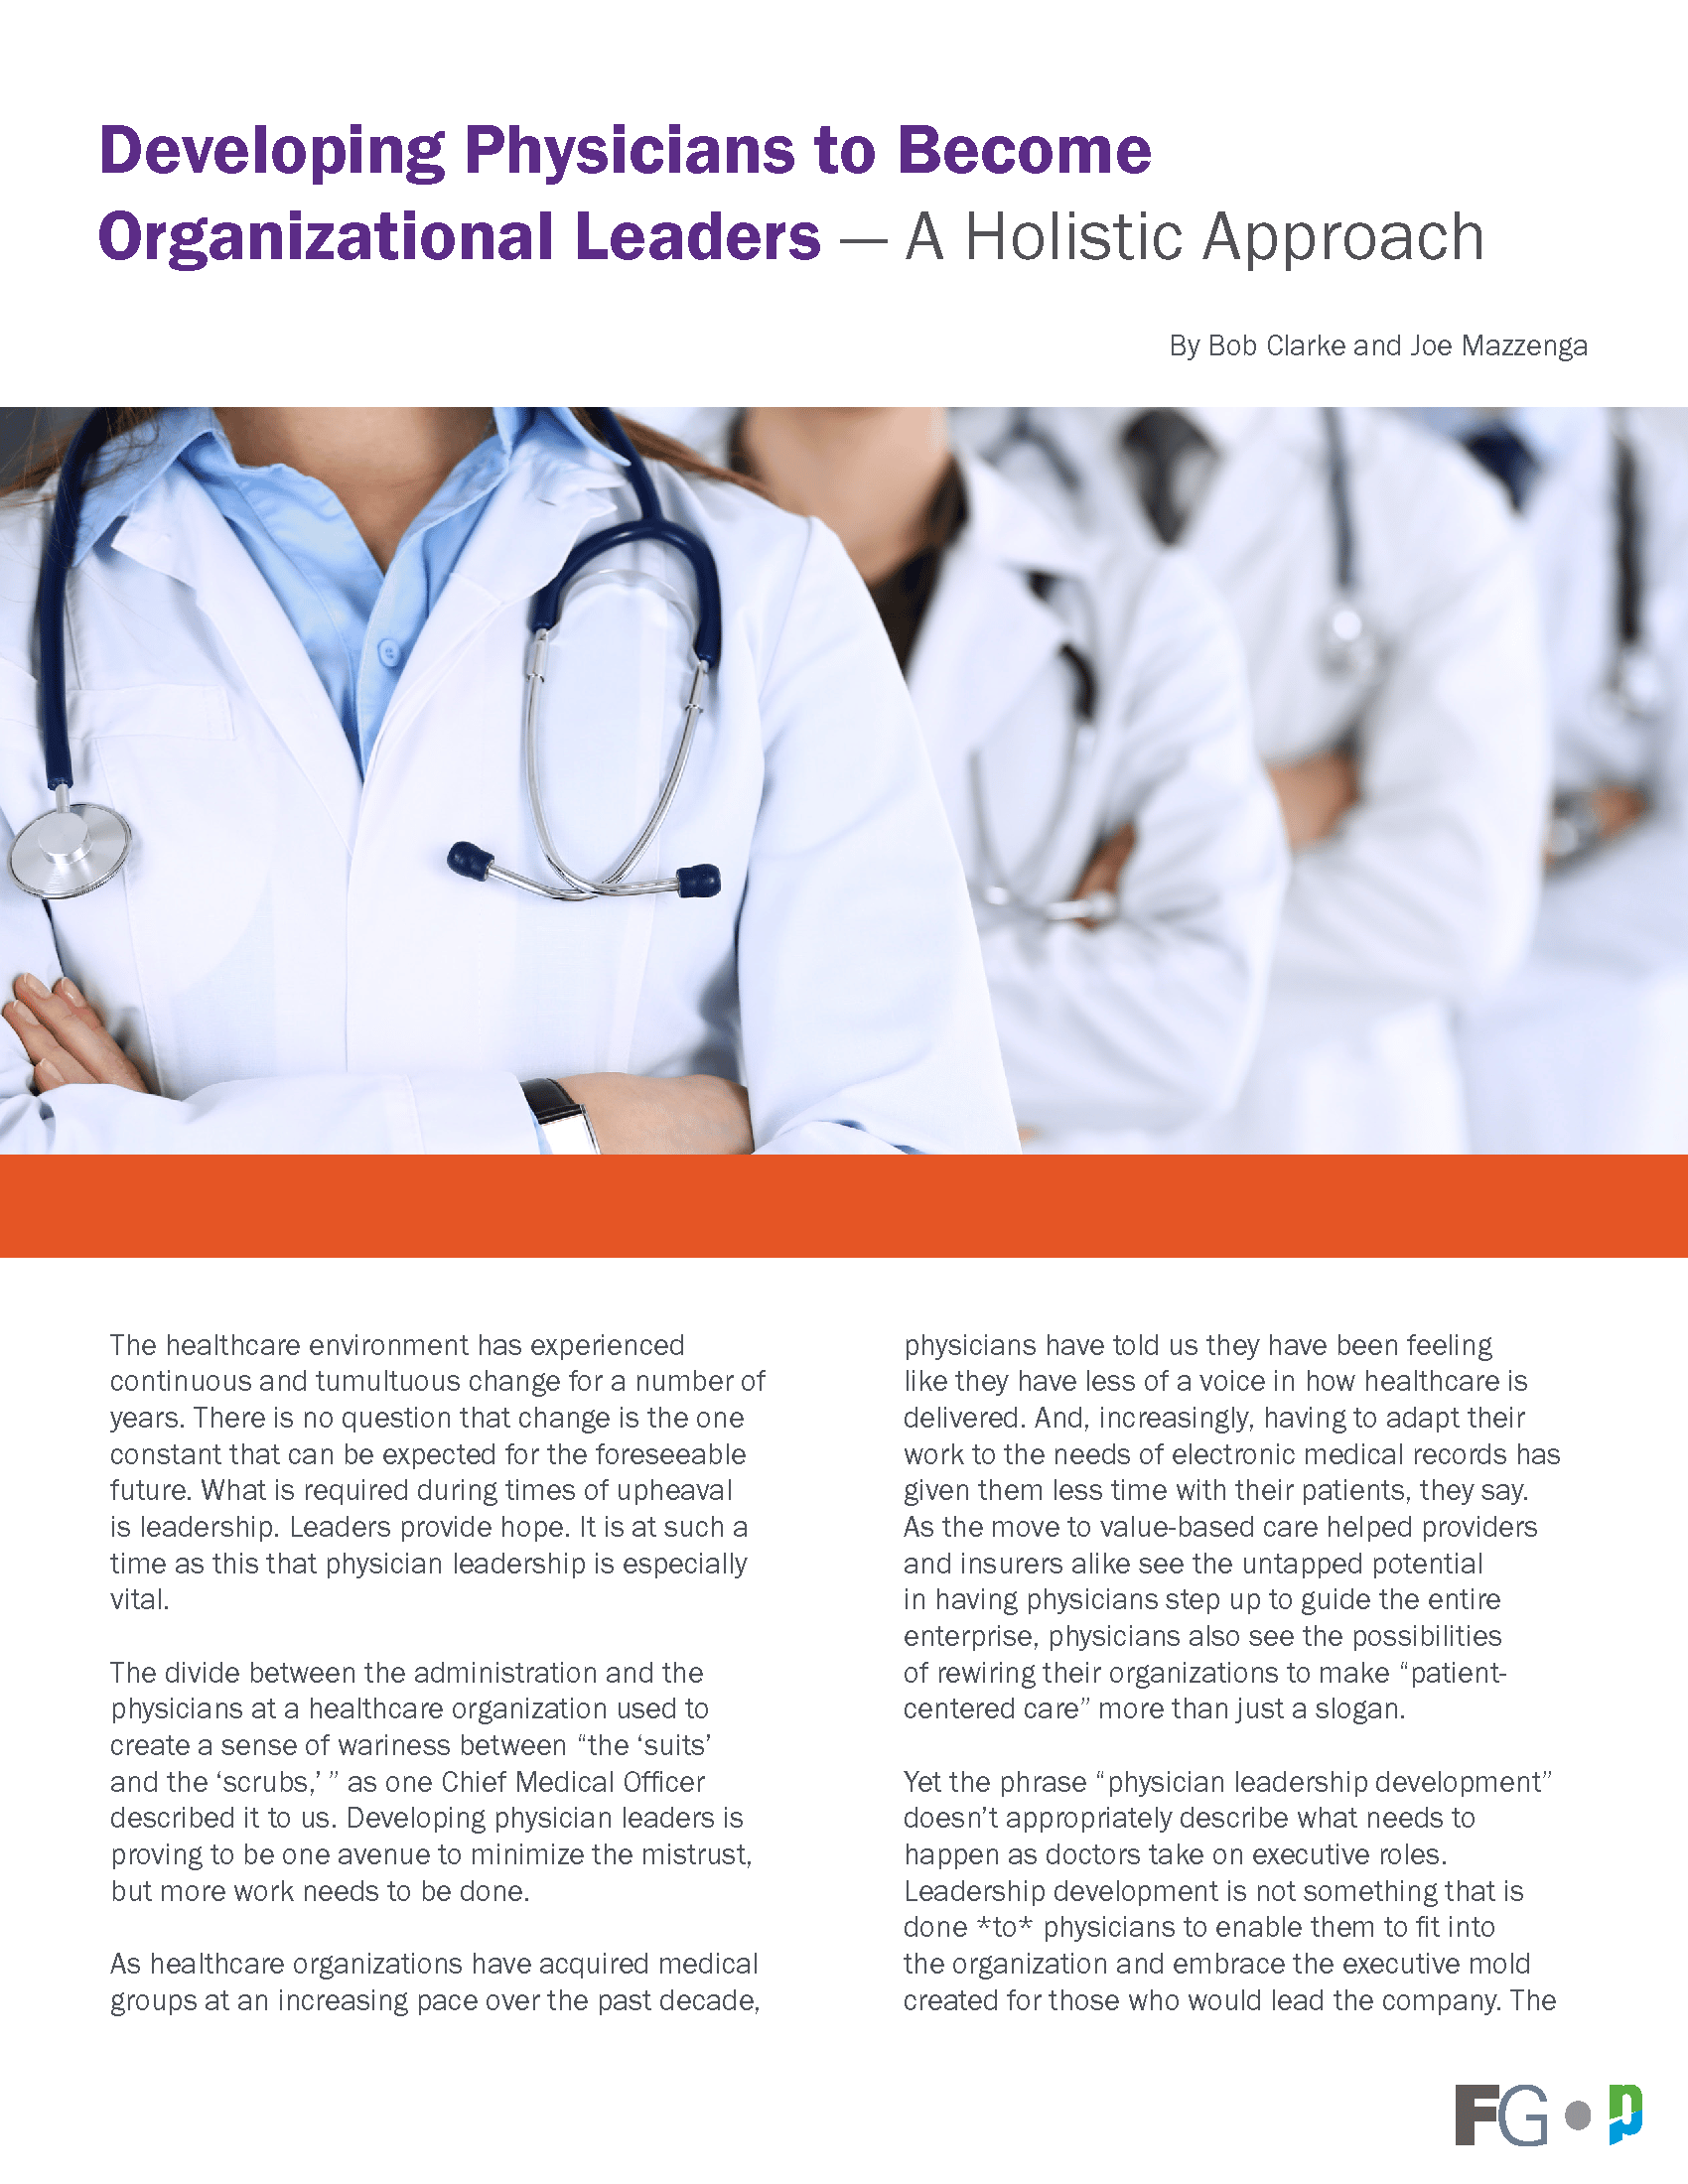 Unlock Article: Developing Physicians to Become Organizational Leaders